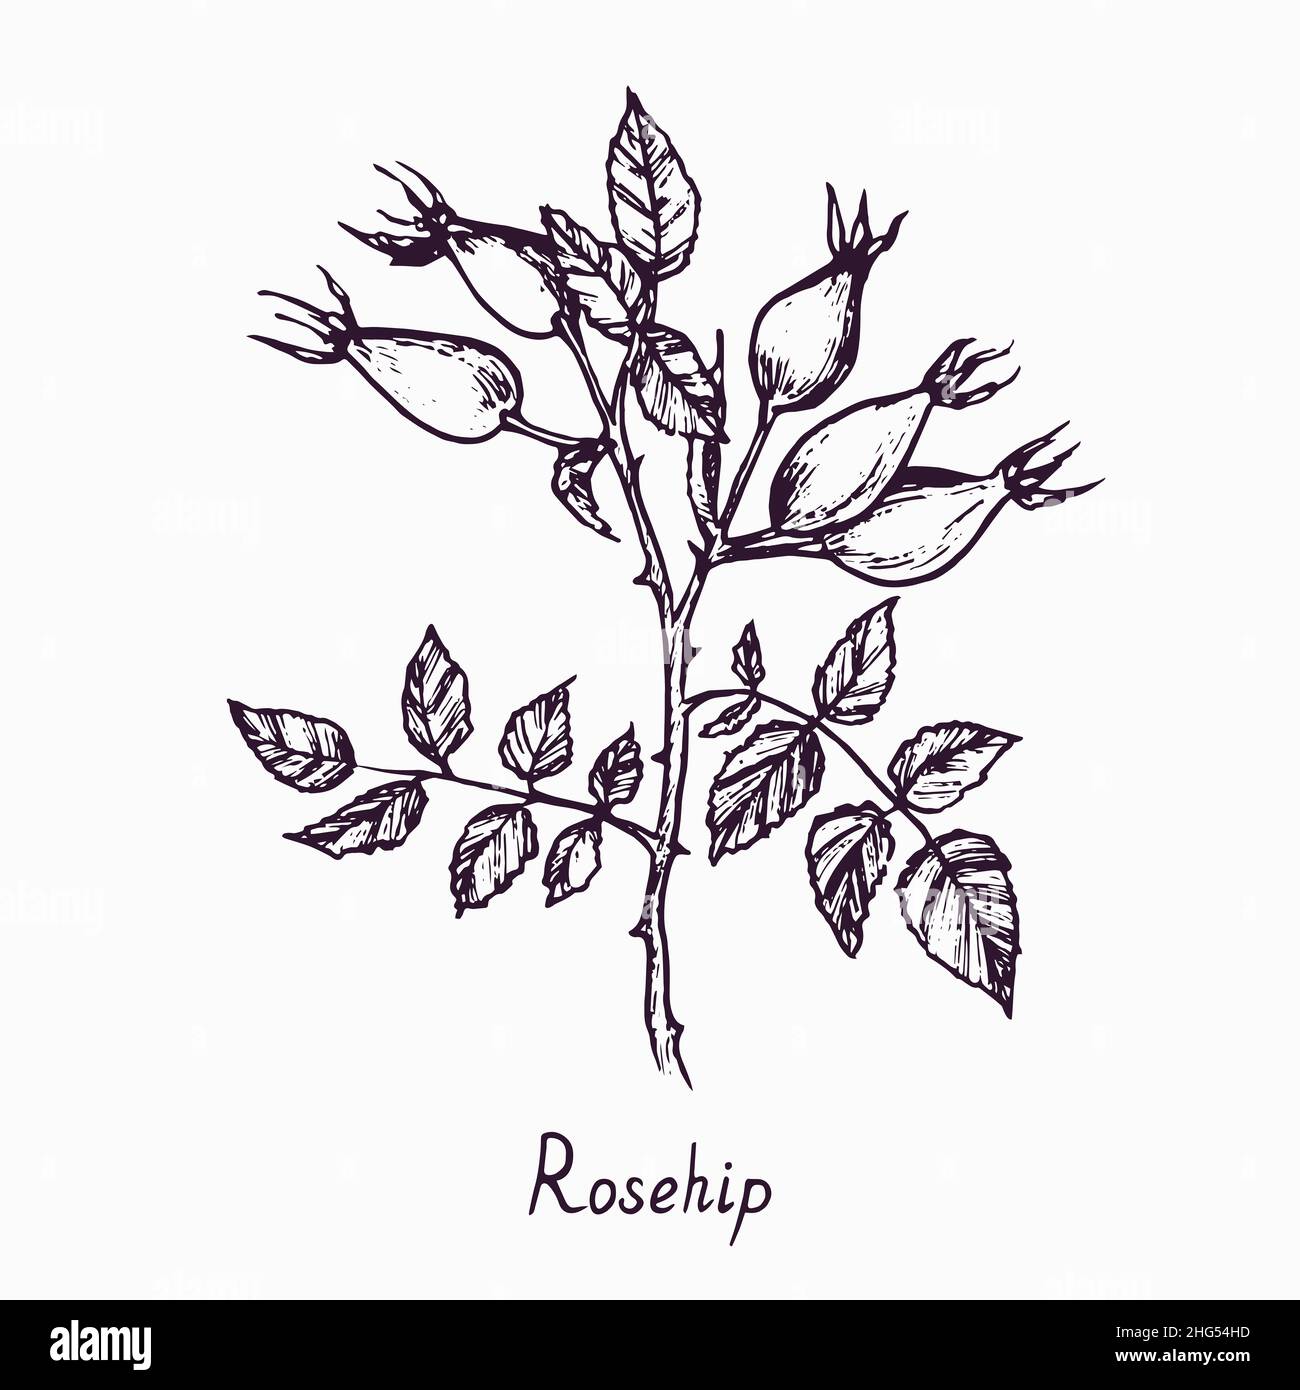 Rosehip branch with berries and leaves, outline simple doodle drawing with inscription, gravure style Stock Photo